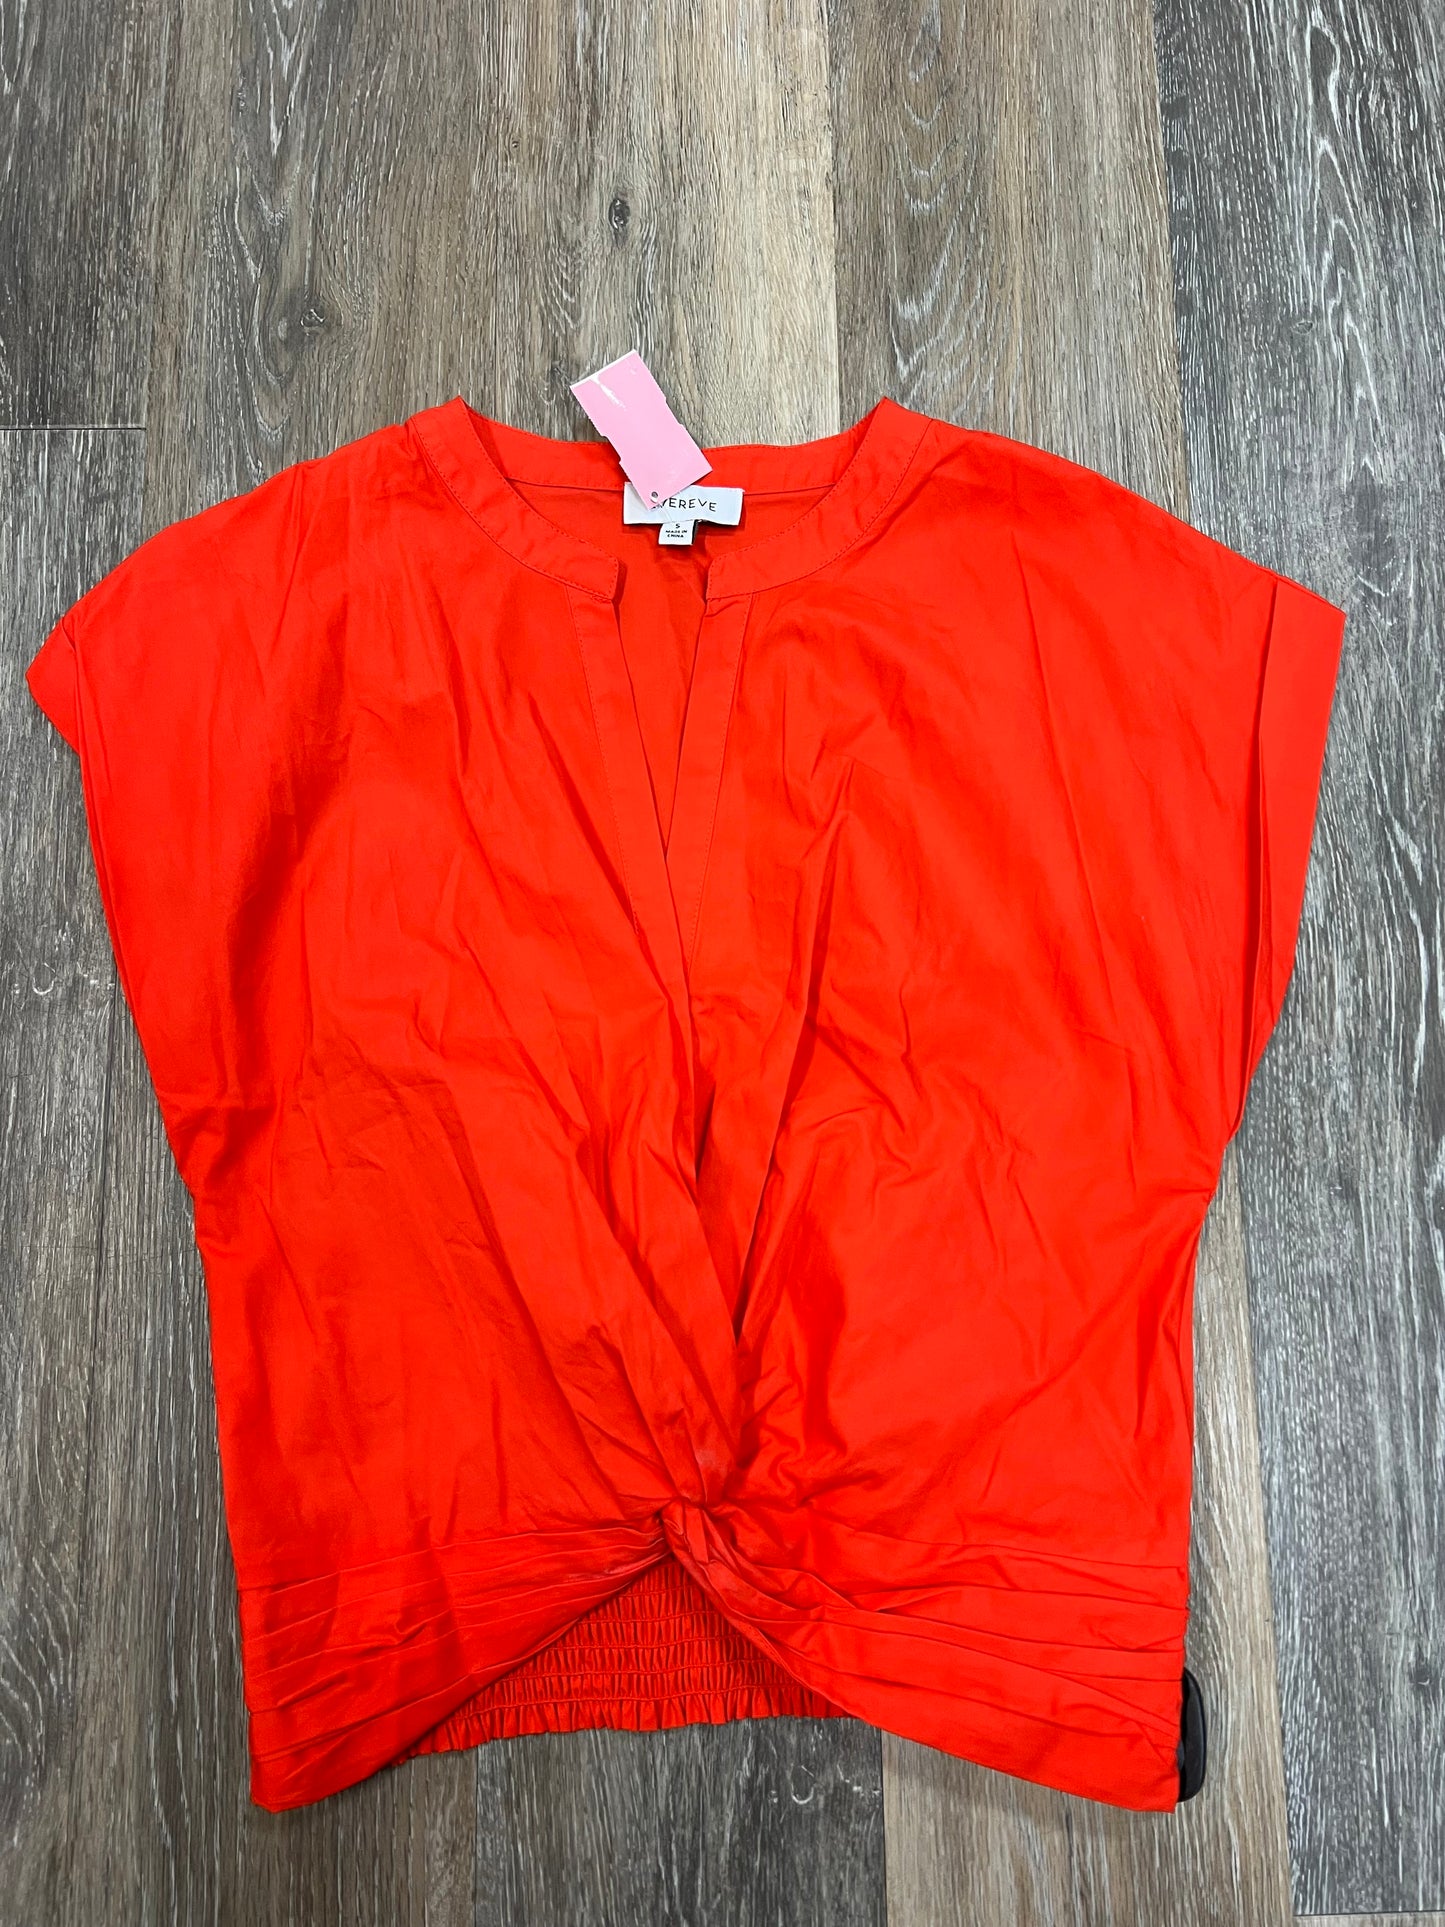 Blouse Short Sleeve By Evereve  Size: S